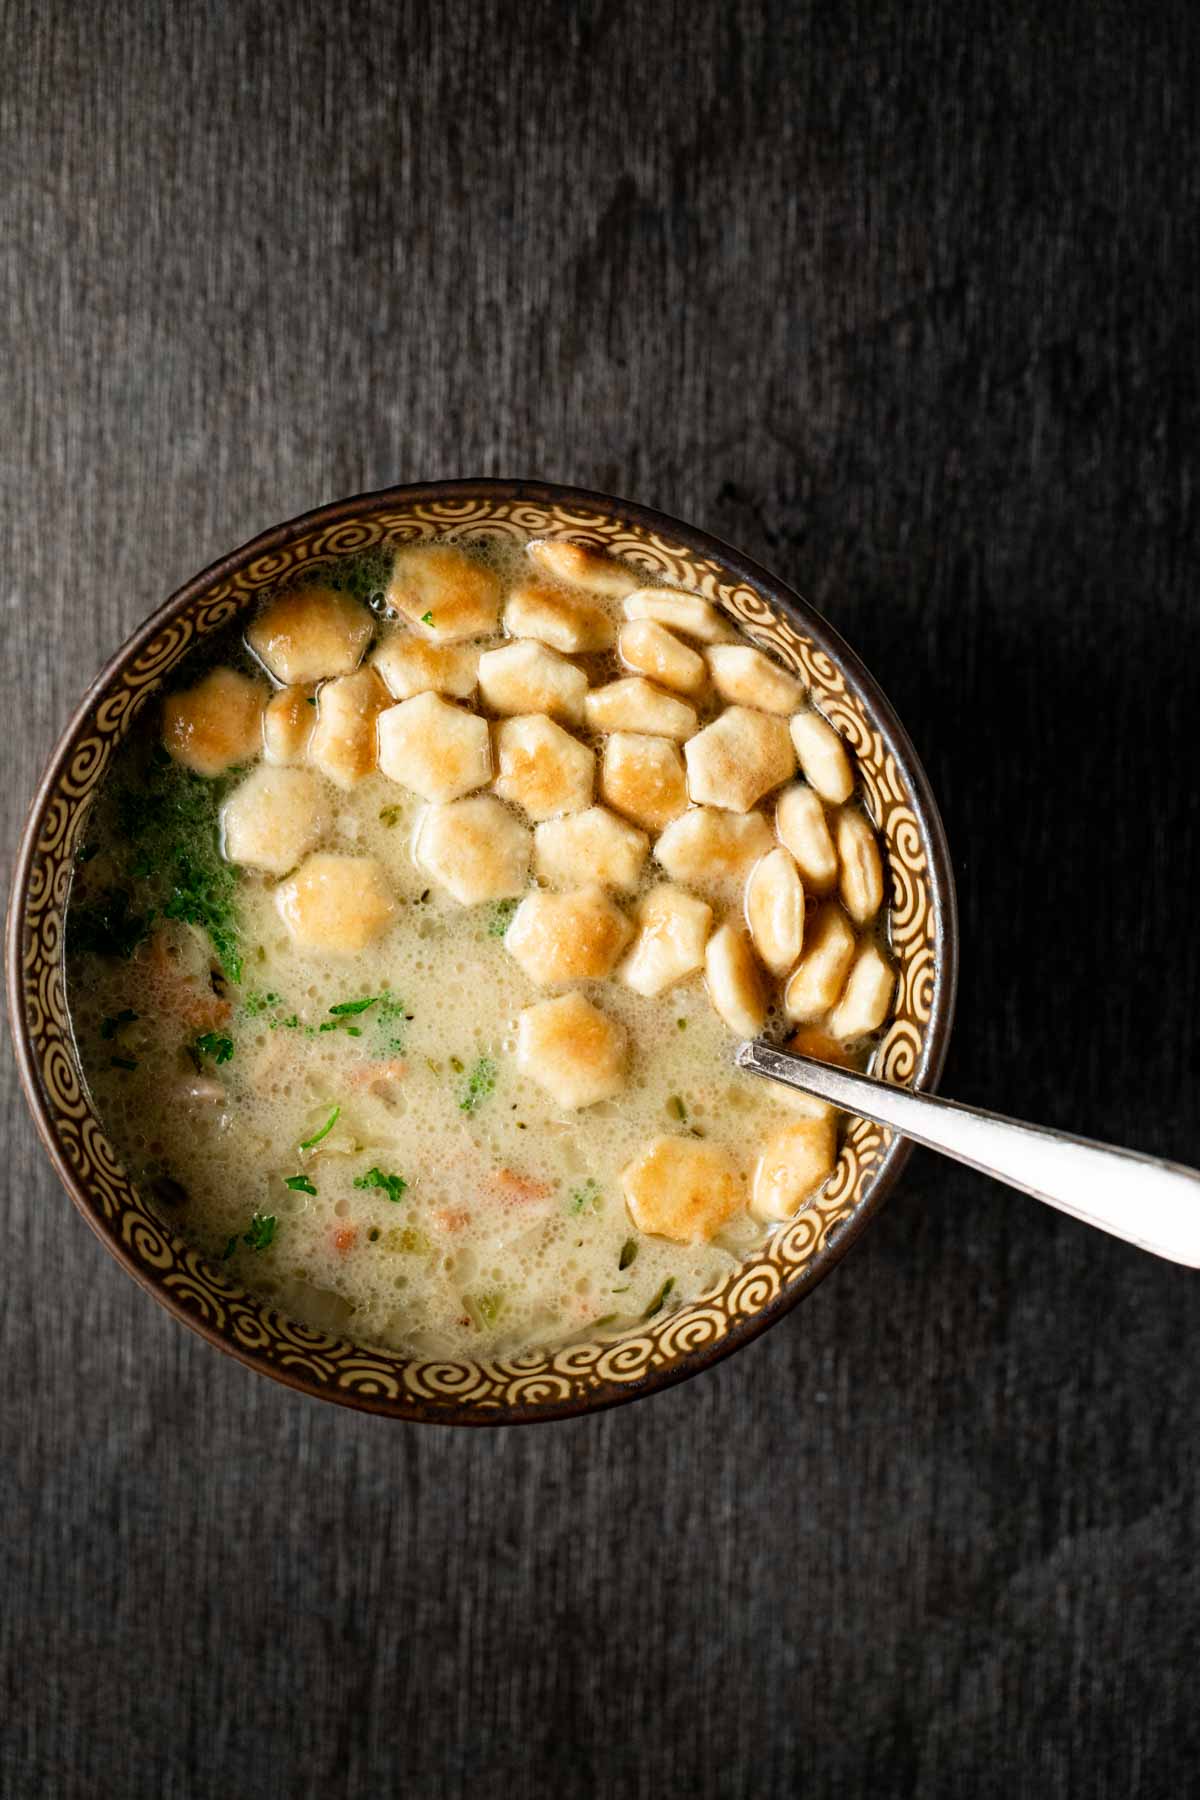 Overhead view of a bowl of clam chowder with crackers on top and a spoon inserted into the bowl.